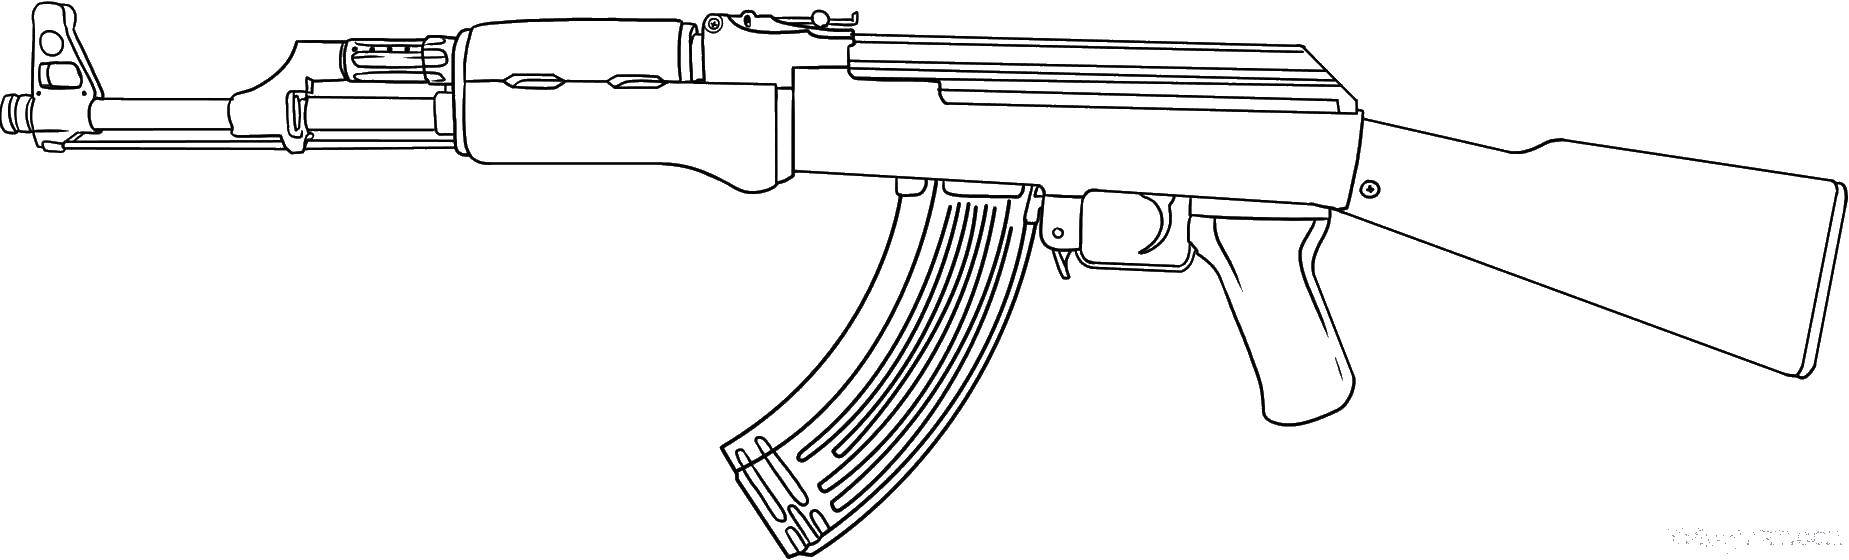 Coloring Weapons. Category weapons. Tags:  Weapons.